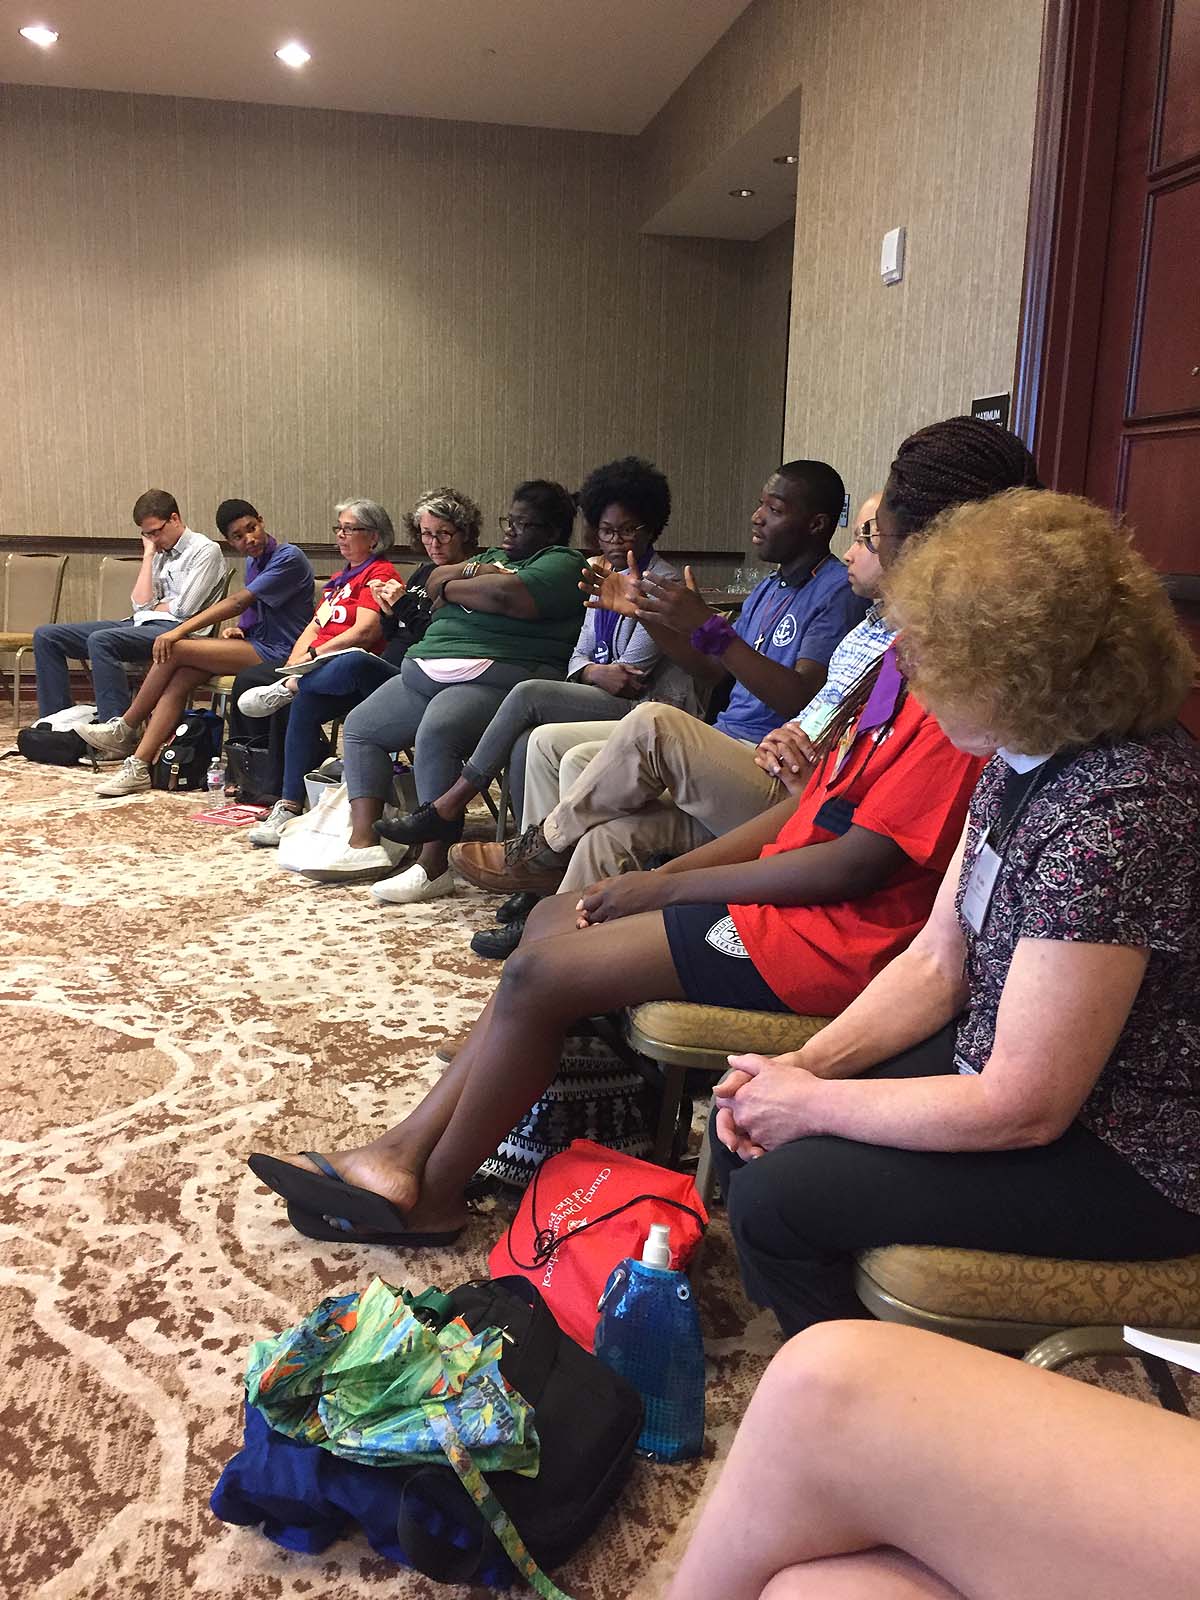 At General Convention, our youth made valuable contributions to a conversation with others on Race and Reconciliation.